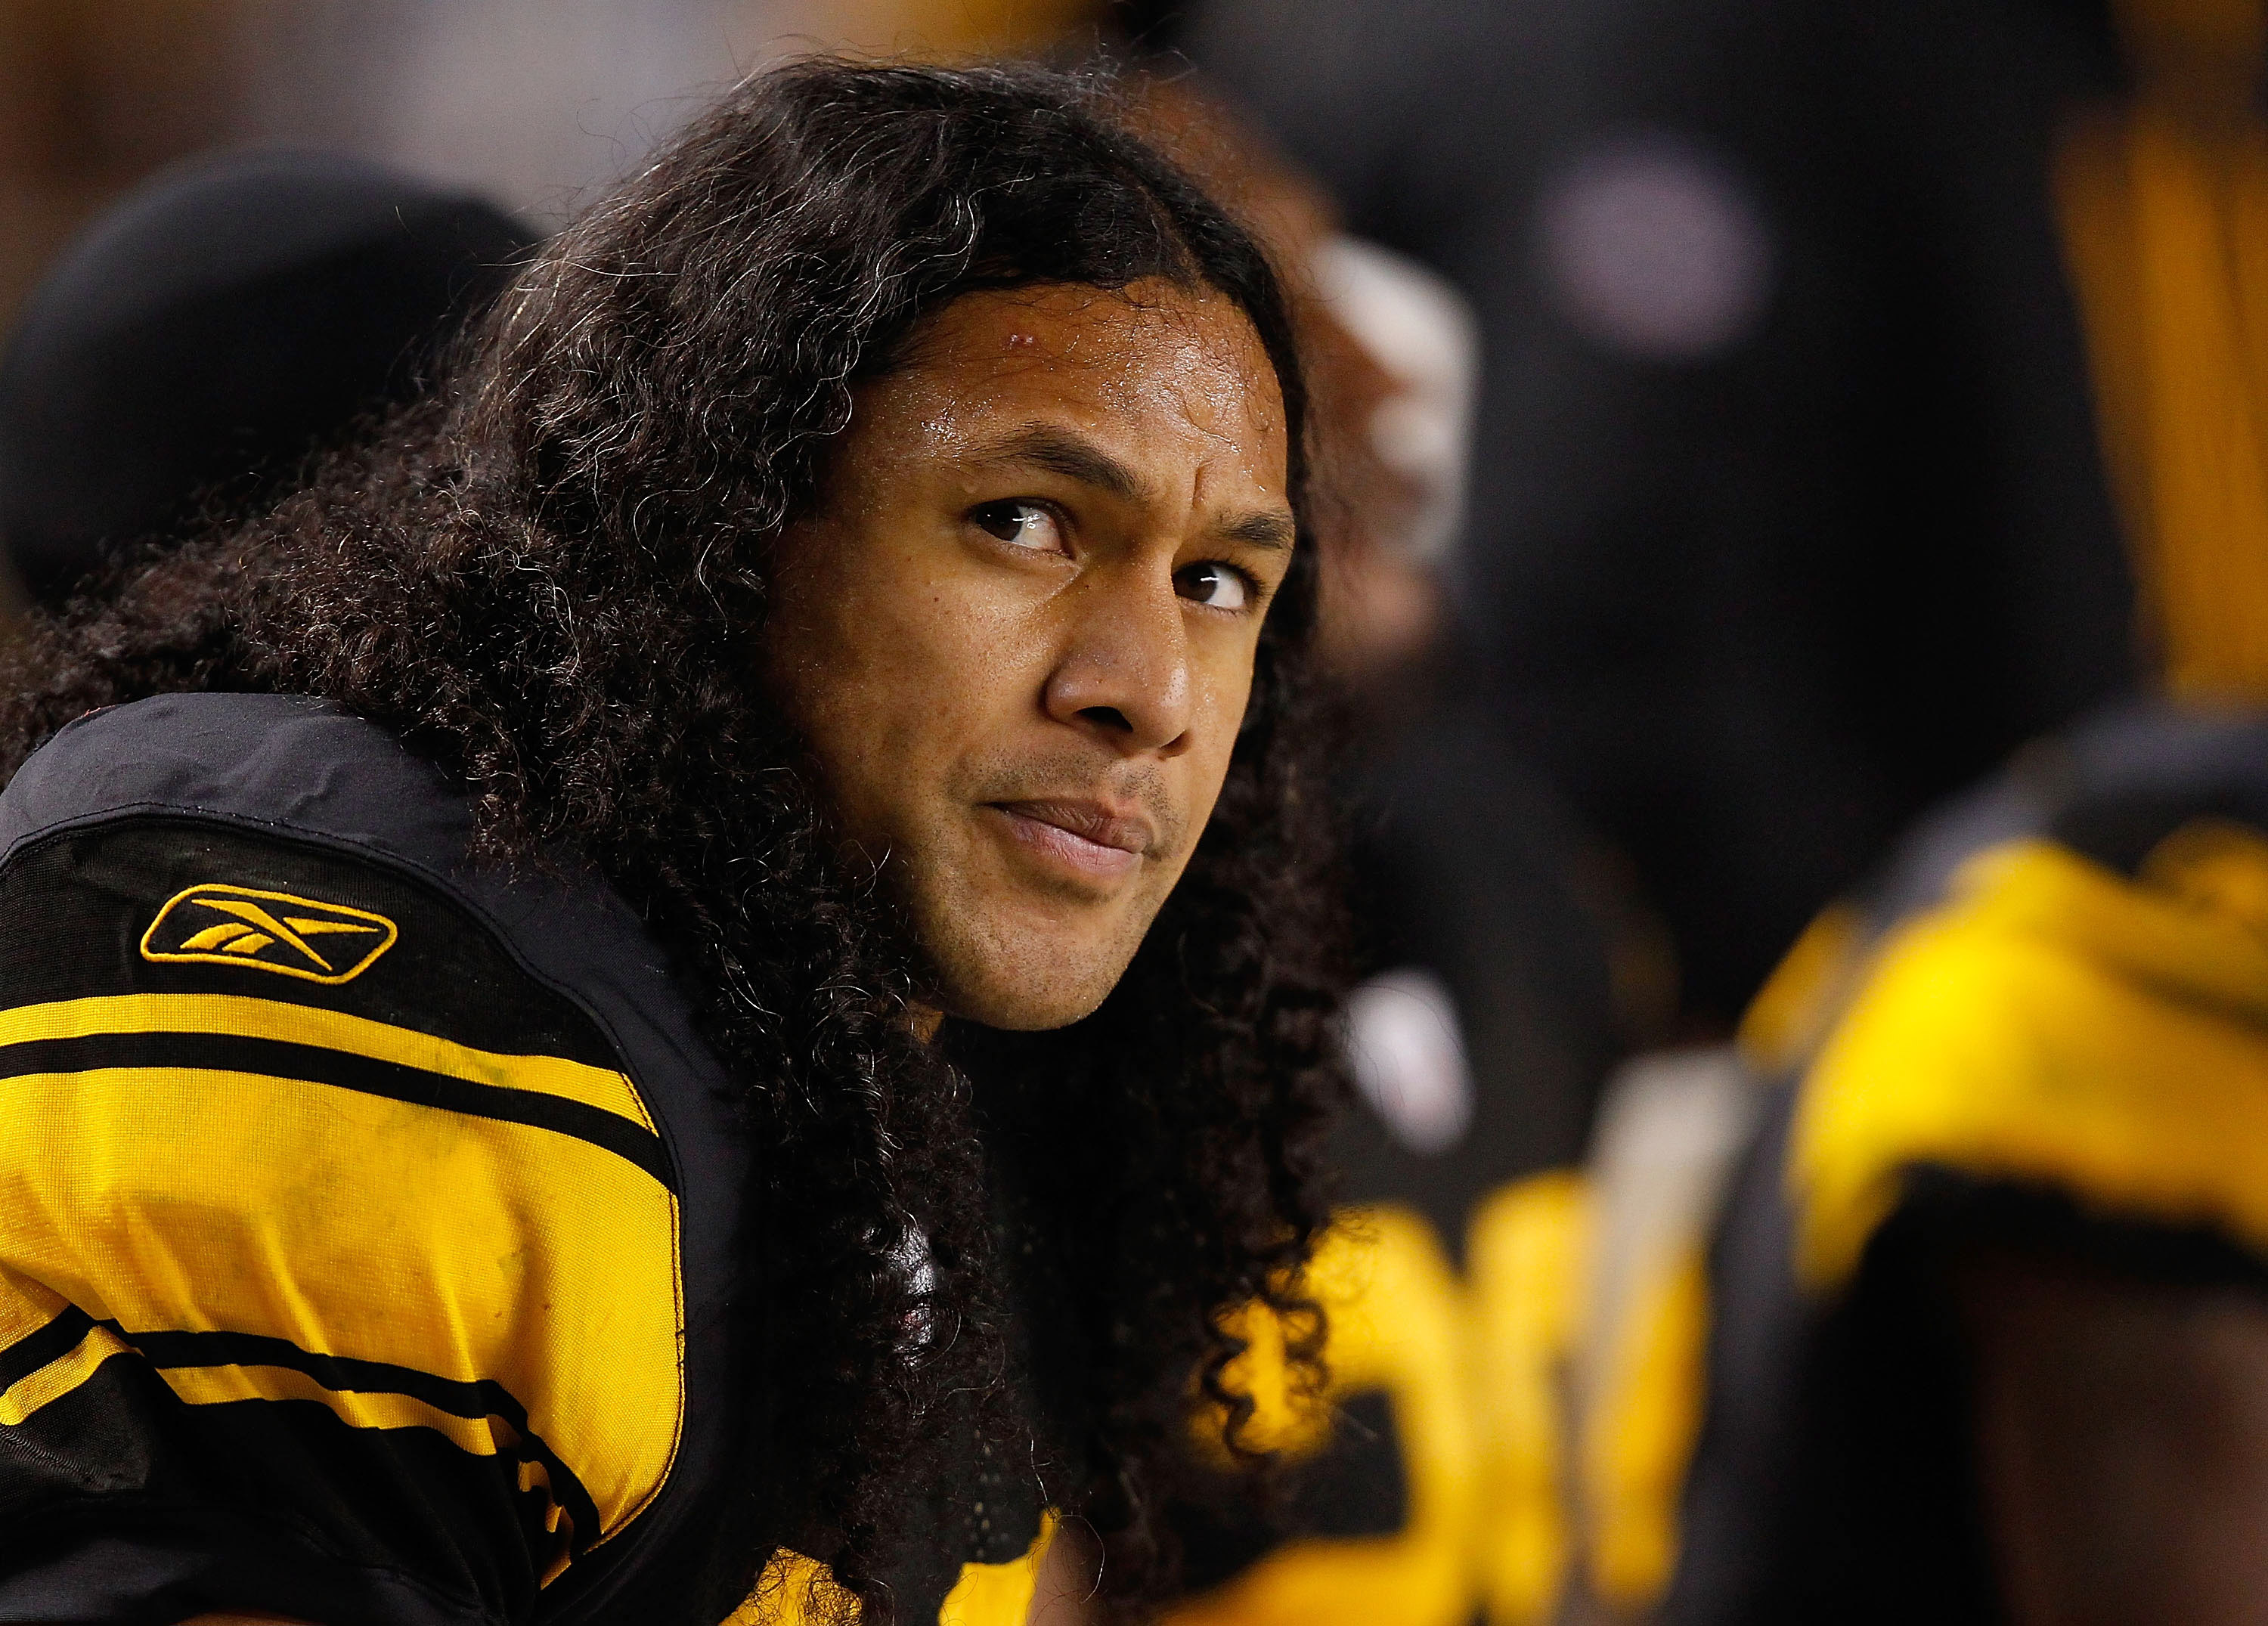 PITTSBURGH - NOVEMBER 14:  Troy Polamalu #43 of the Pittsburgh Steelers watches the game against the New England Patriots from the bench during the game on November 14, 2010 at Heinz Field in Pittsburgh, Pennsylvania.  (Photo by Jared Wickerham/Getty Imag